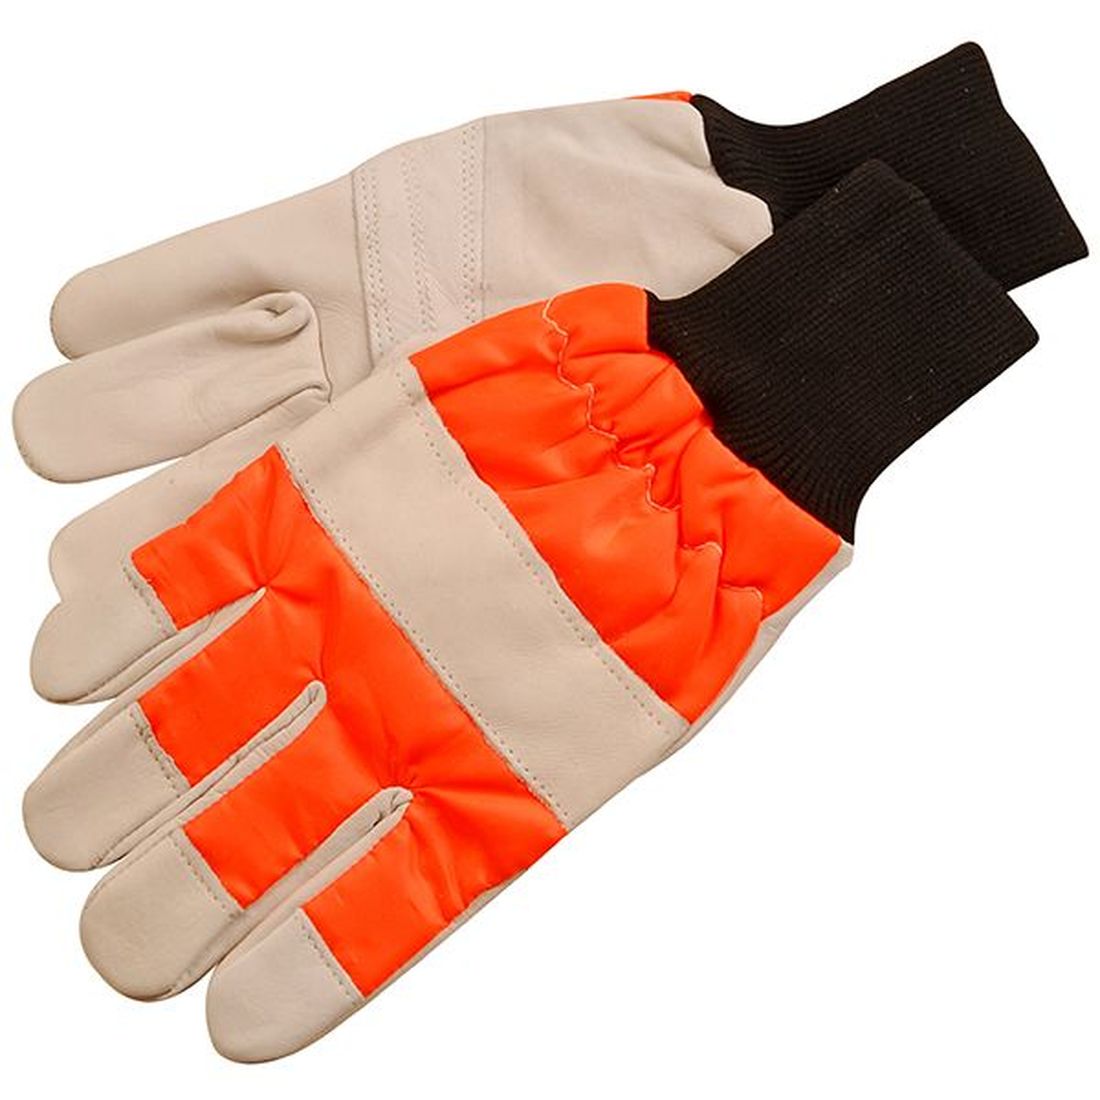 ALM CH015 Chainsaw Safety Gloves - Left Hand protection                             